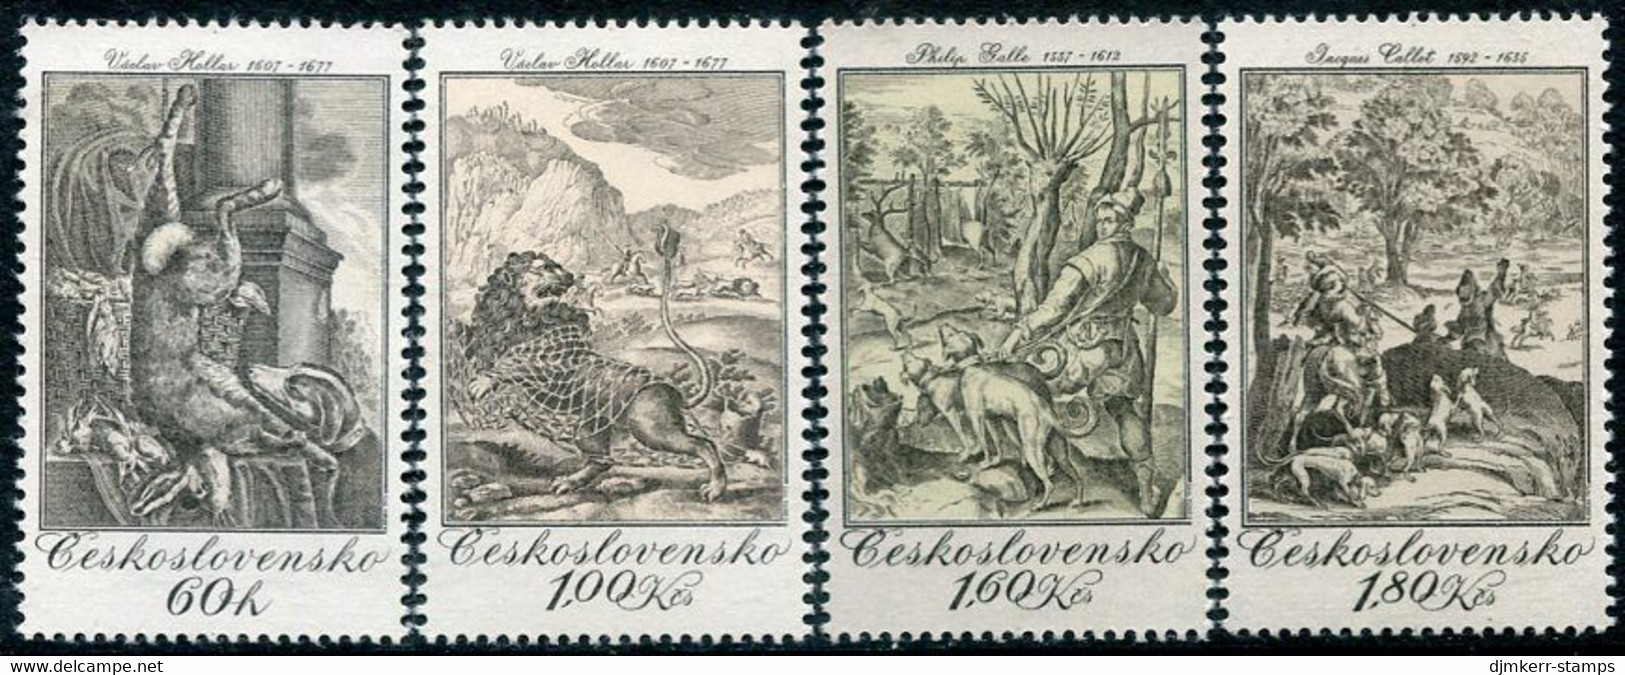 CZECHOSLOVAKIA 1975 Engravings With Hunting Scenes MNH / **. Michel 2240-43 - Neufs